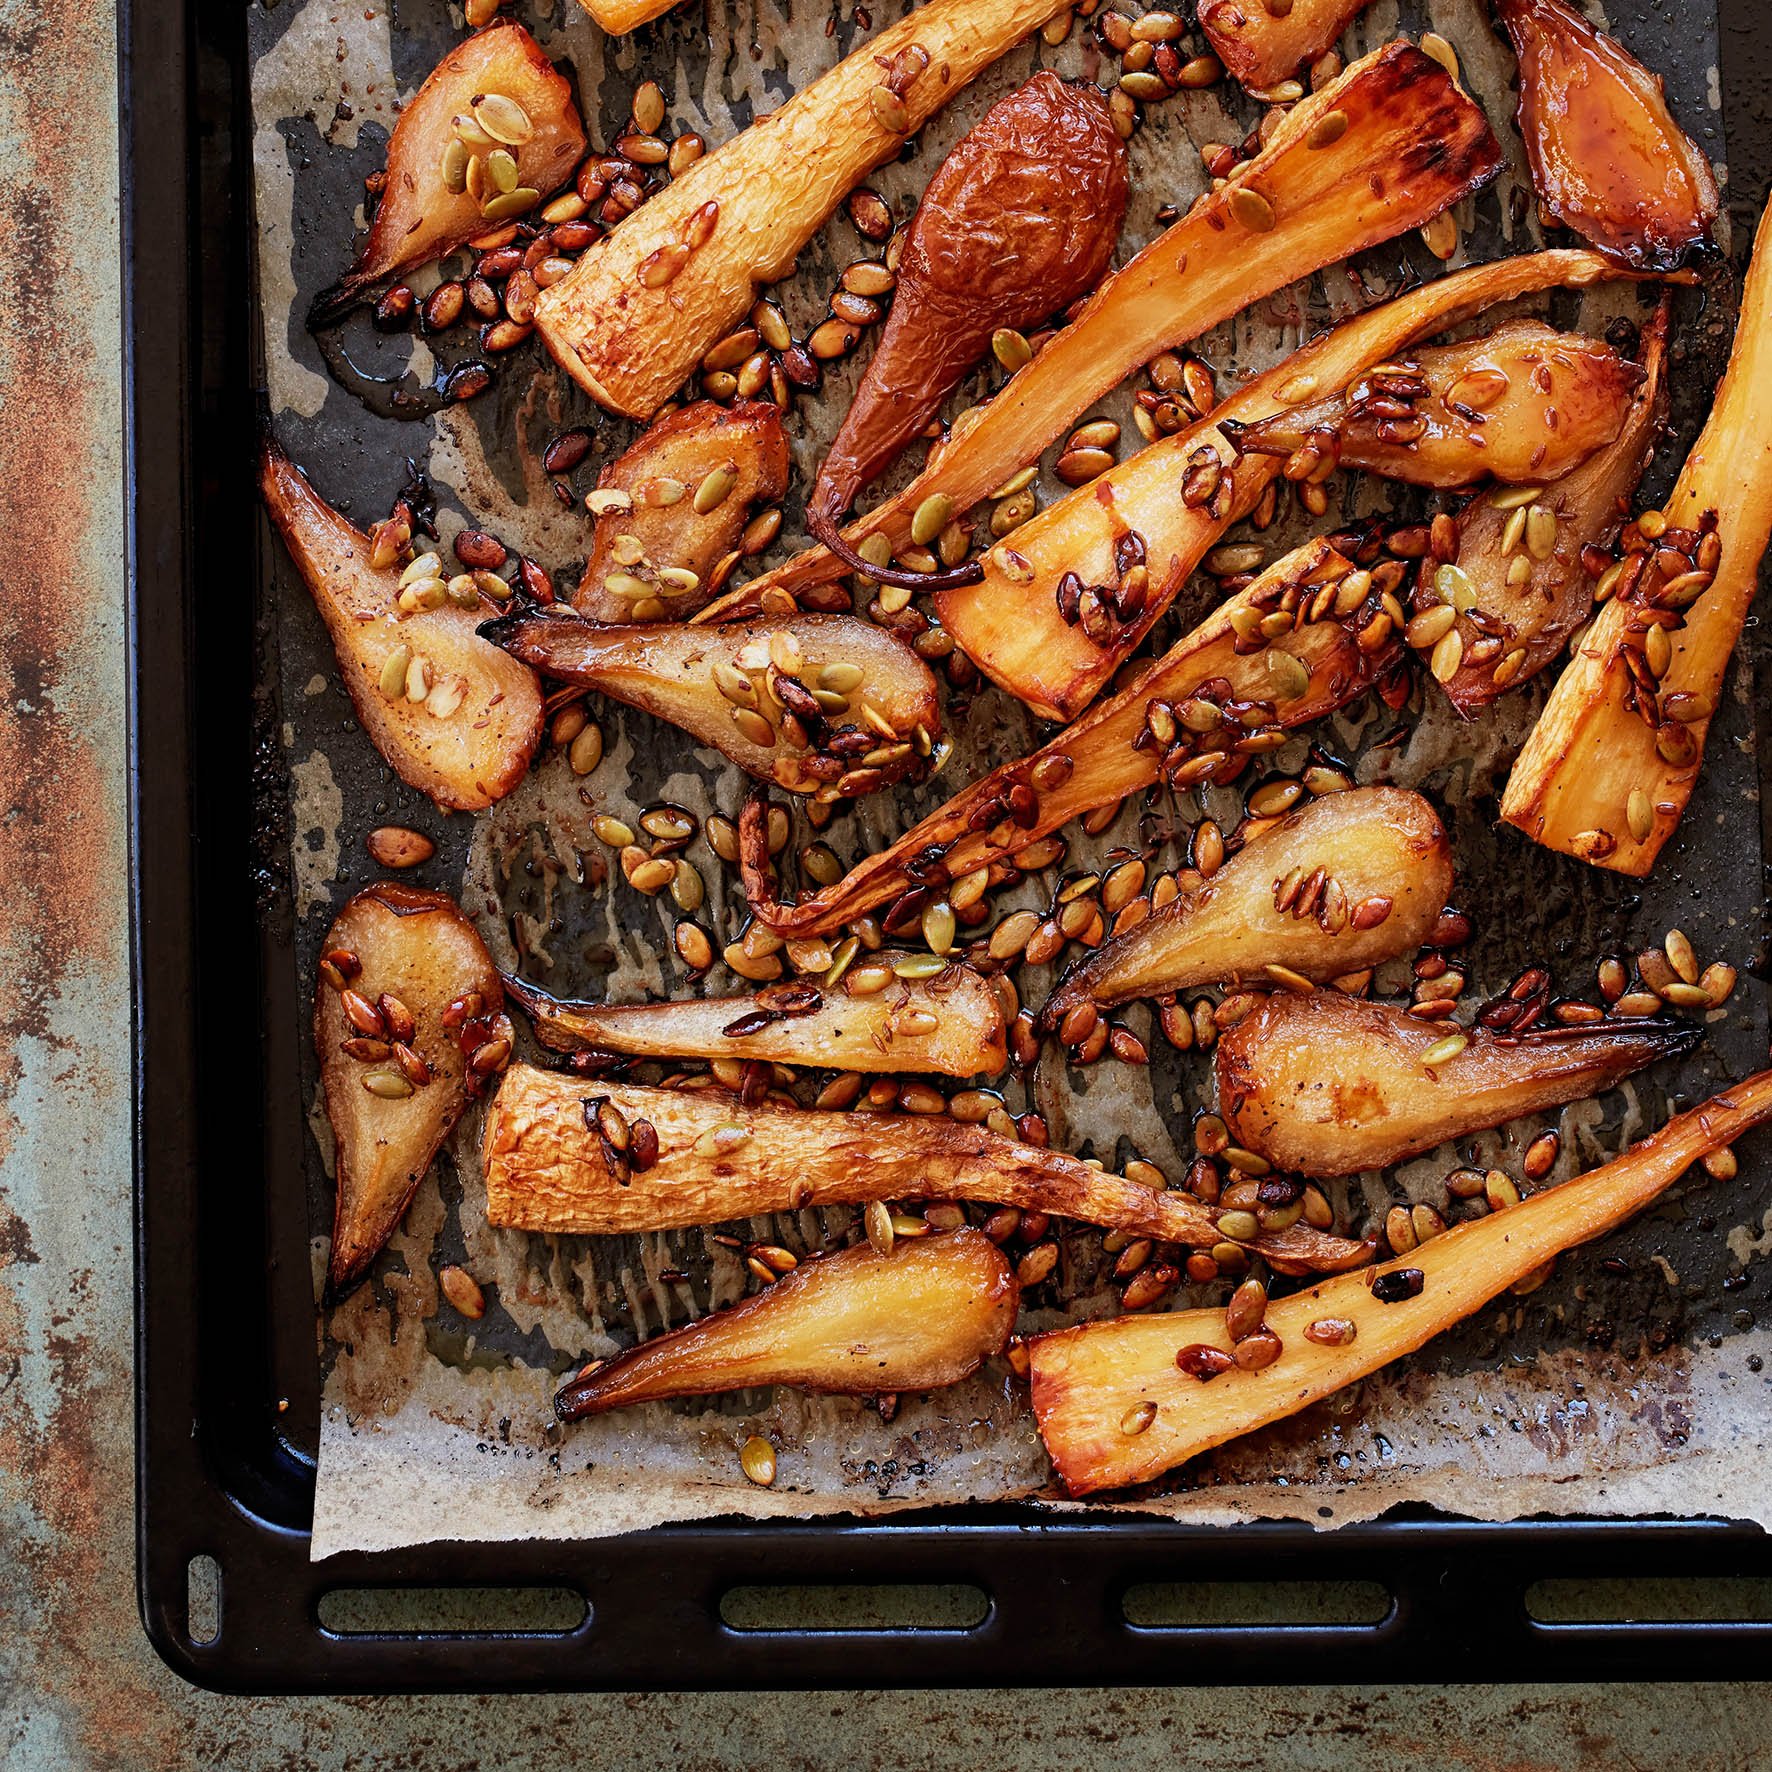 Lucy's Honey-roasted Pears and Parsnips were probably one of the only times during our photographing of HOMECOOKED that we stood around and munched our way through the entirety of what we had just shot 😆. The tray of sticky, sweet, yet also sharply 